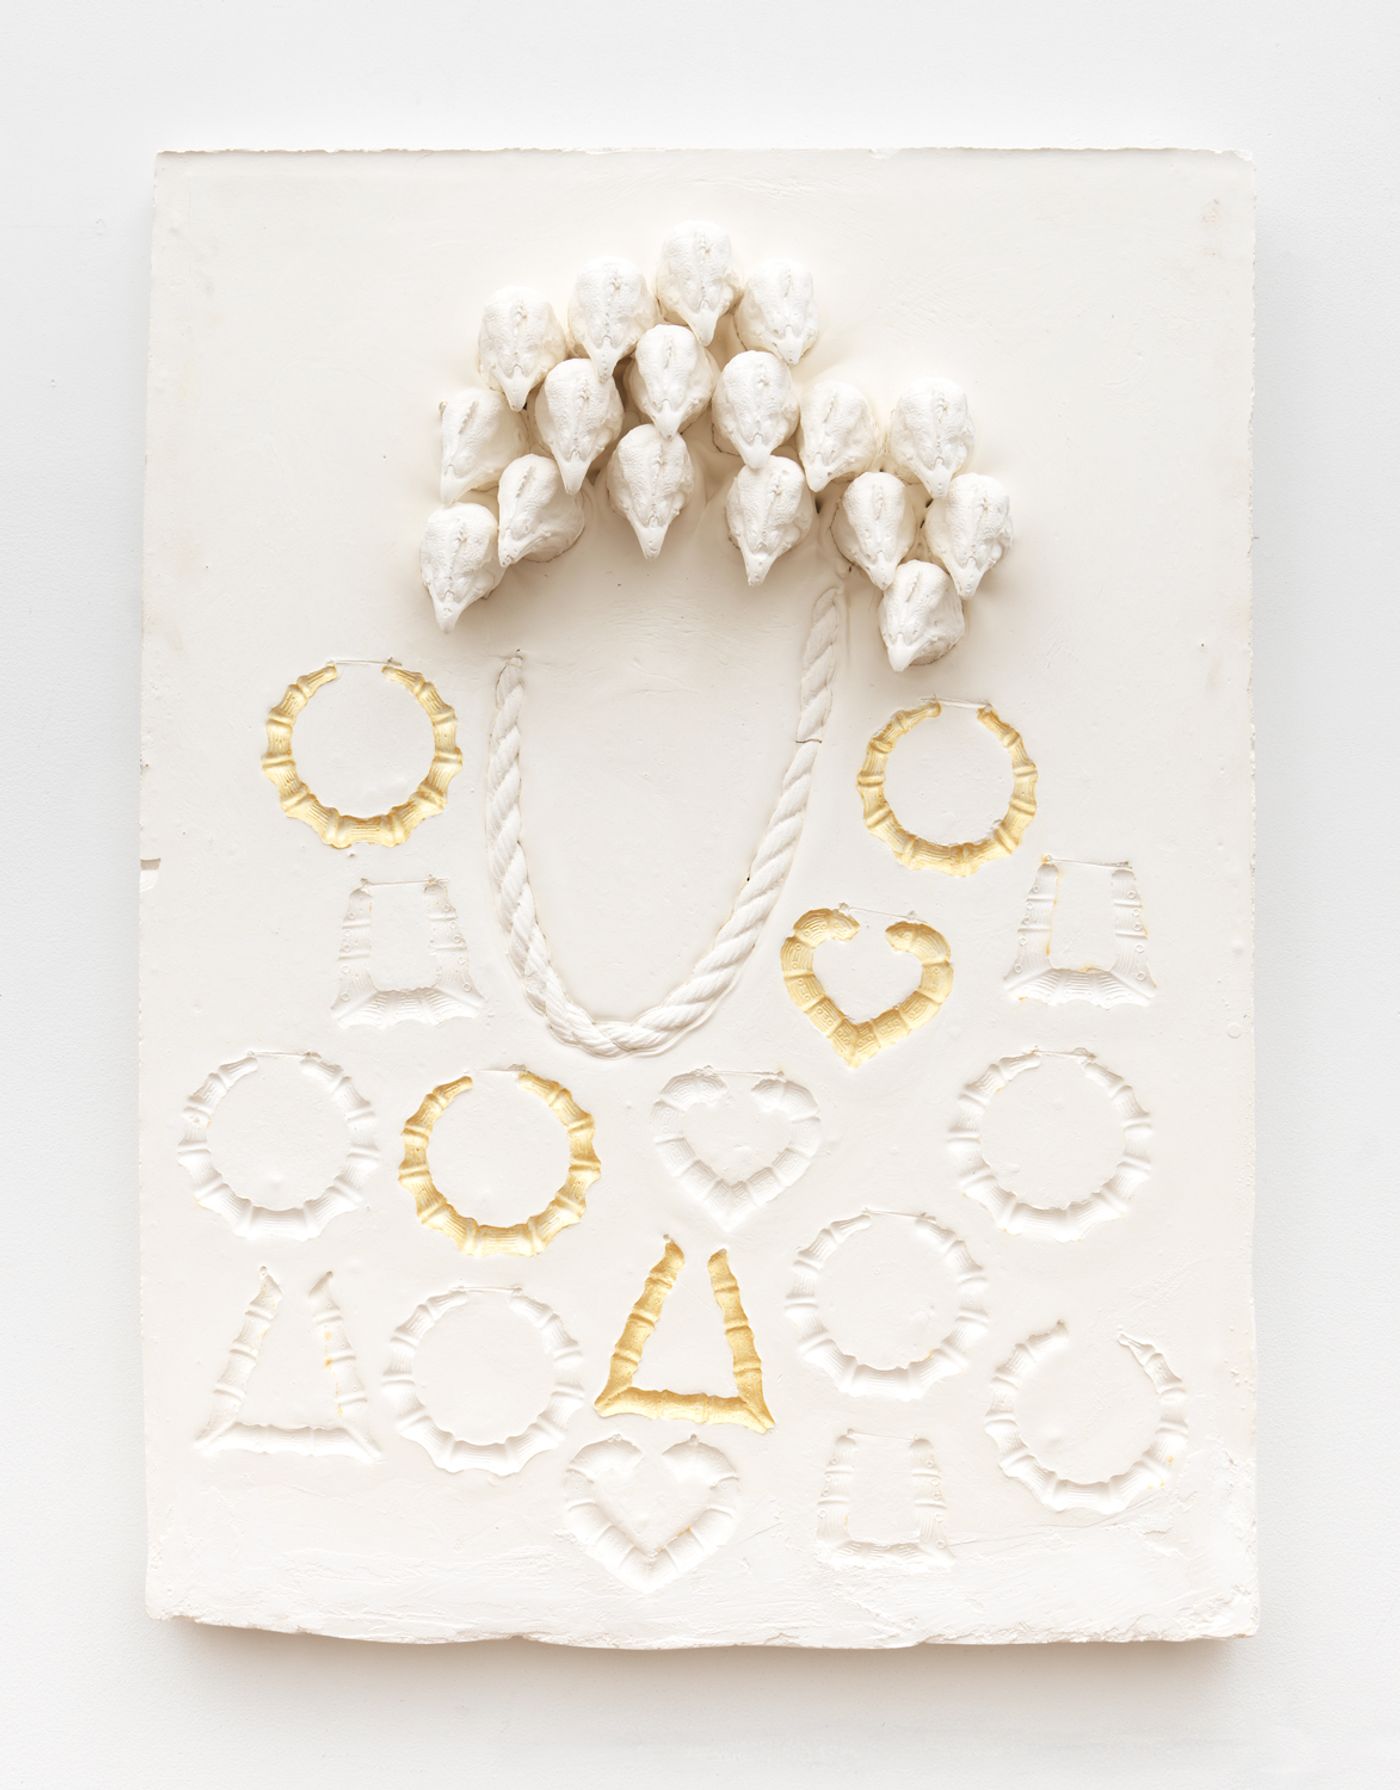 Image of Composition with chicken heads, rope, round earrings, heart earrings and bamboo earrings, 2019: Plaster and acrylic